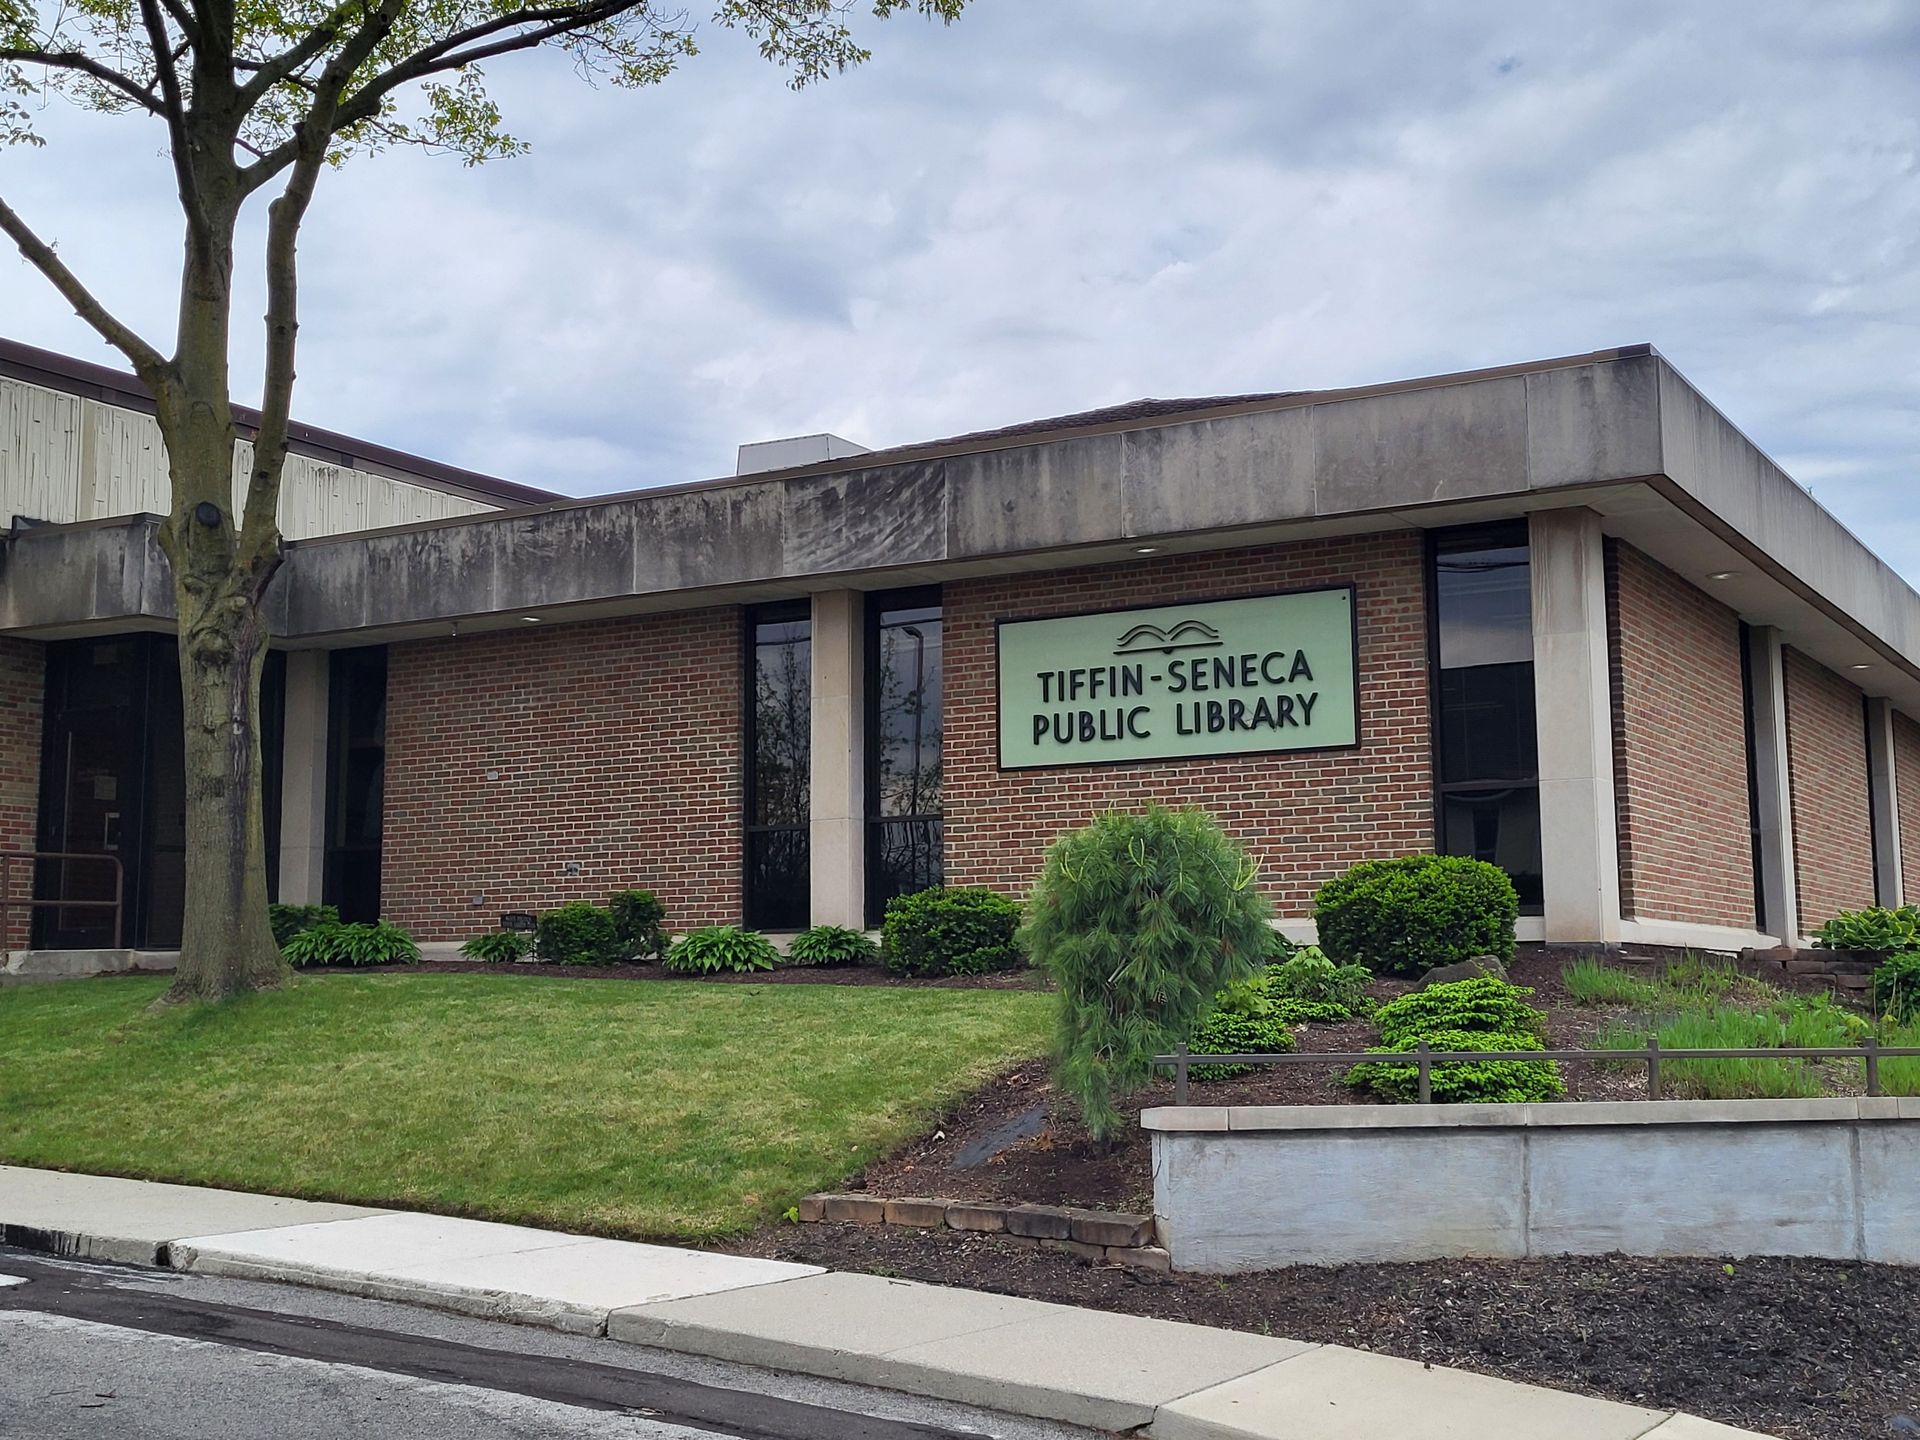 A brick building with a sign that says thrift seneca public library